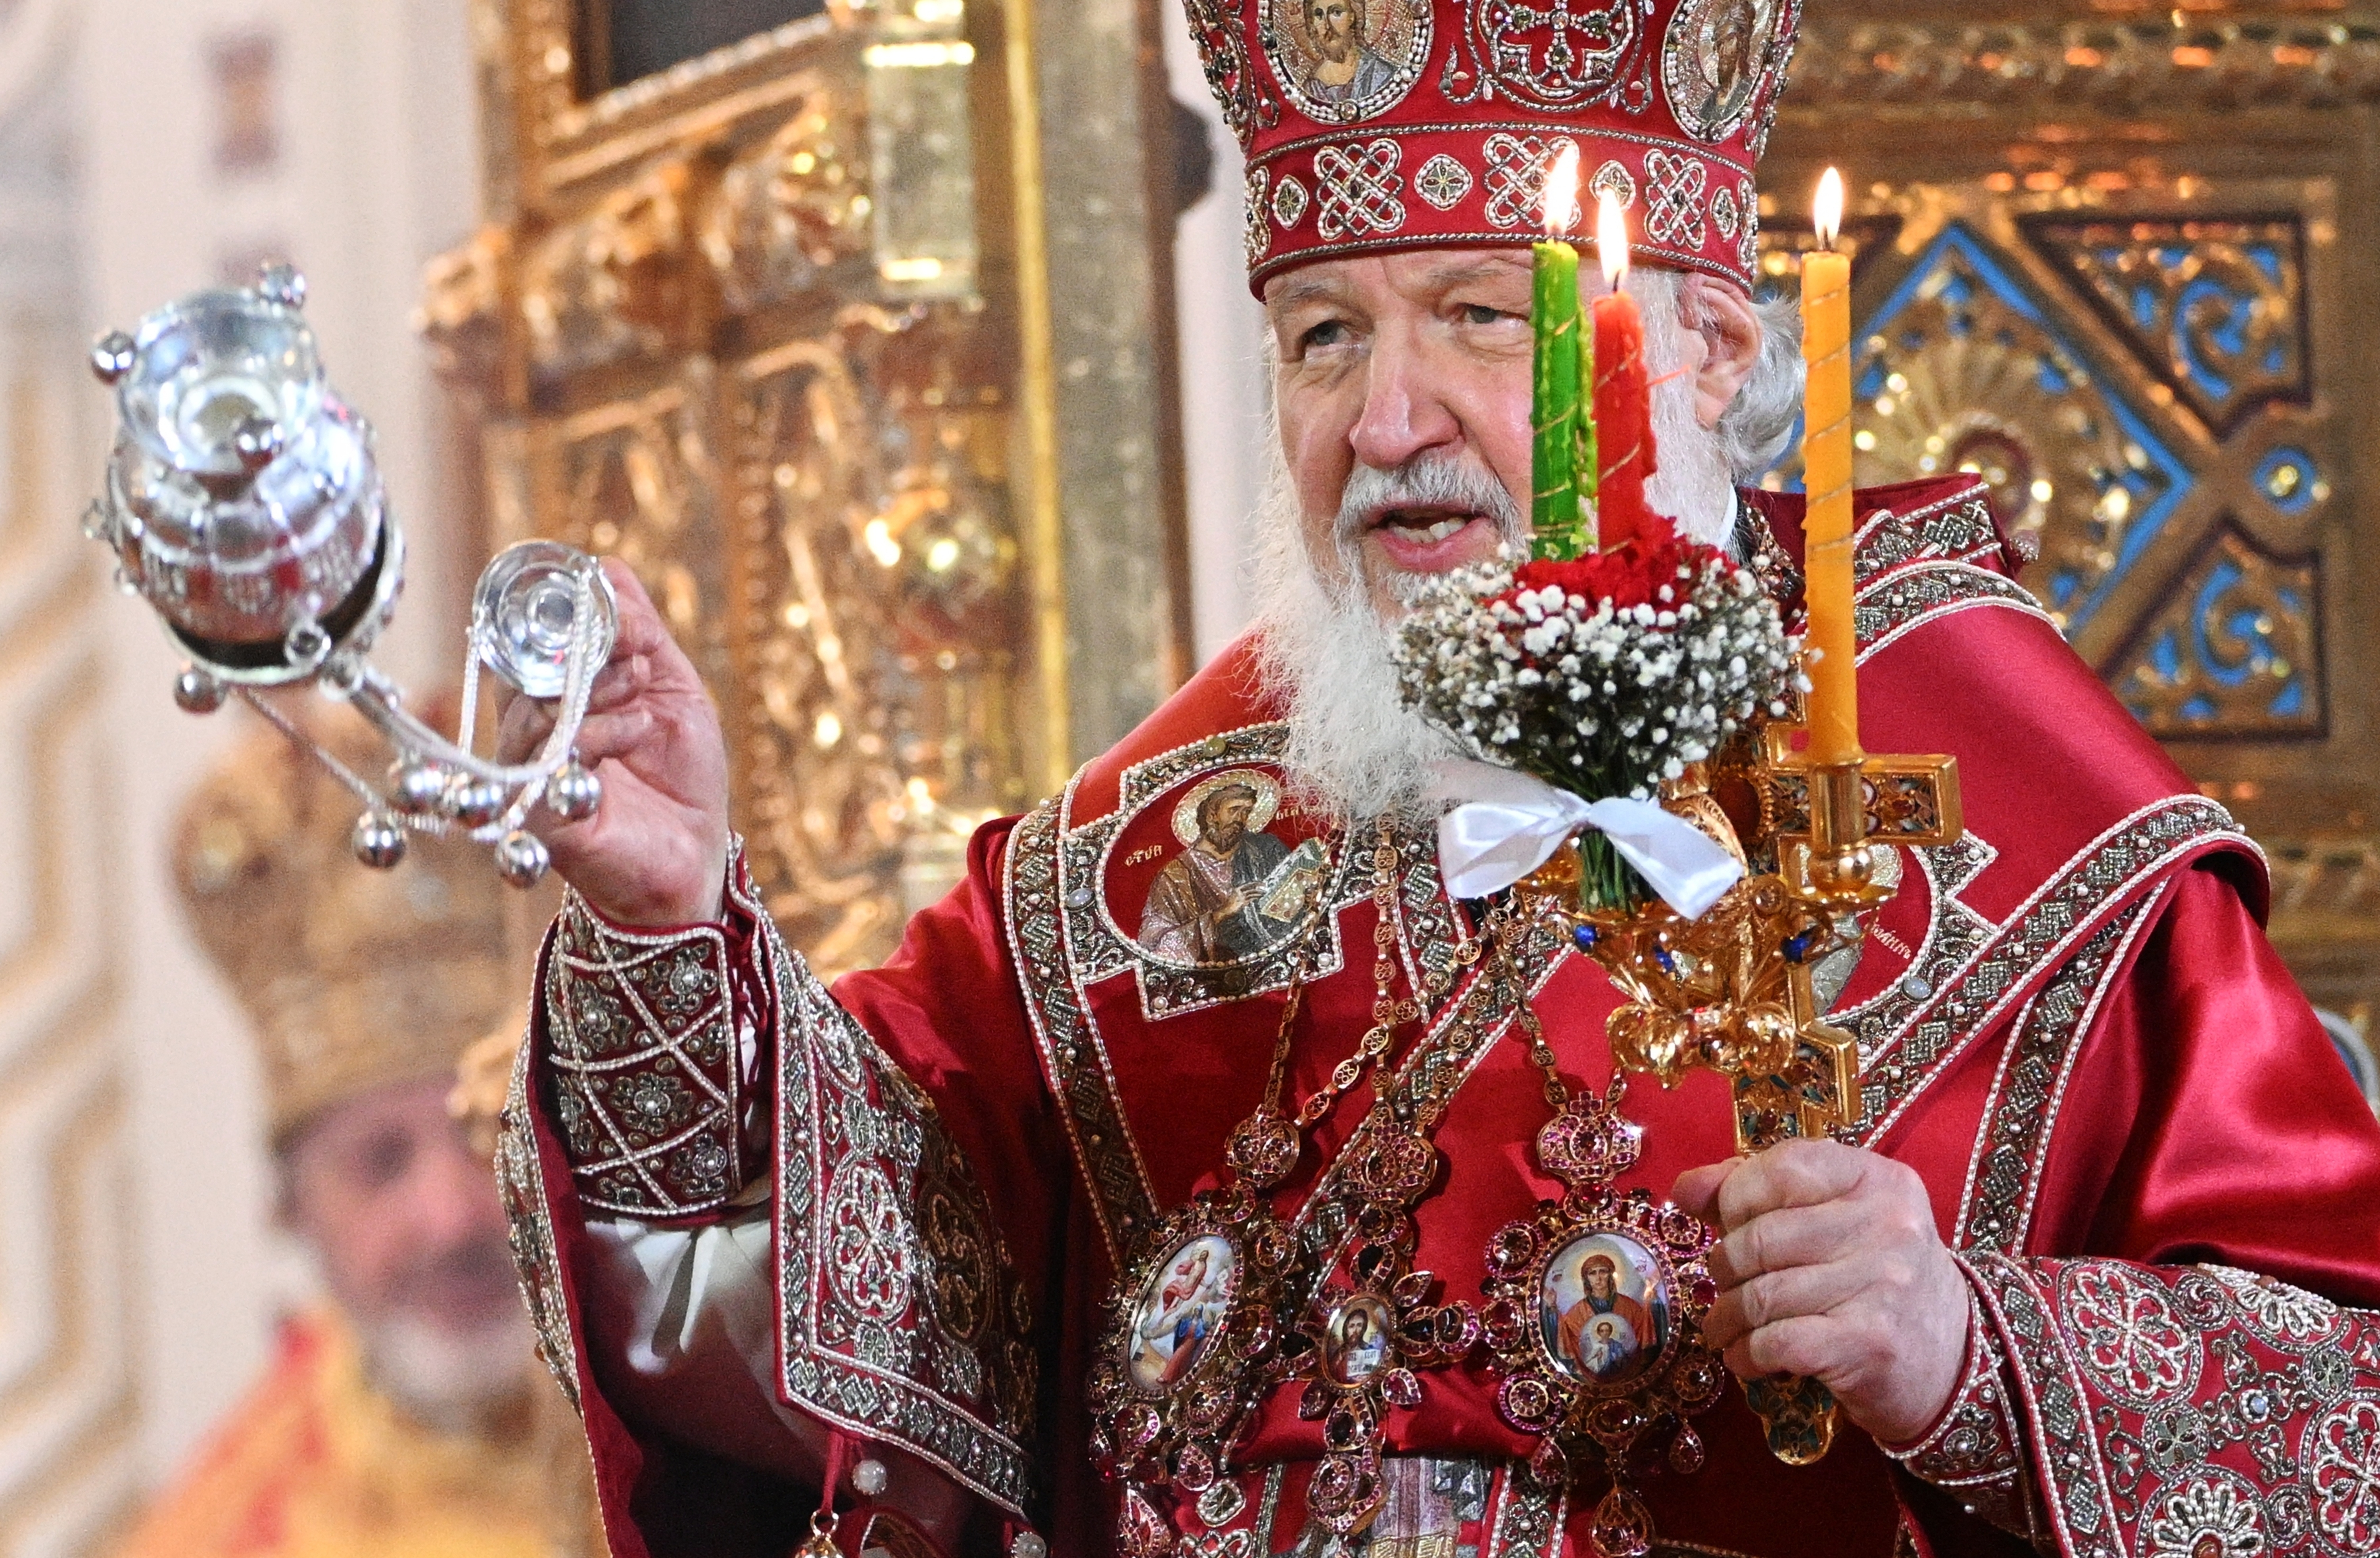 Russian Orthodox Church Patriarch Kirill conducts an Orthodox Easter service in the Christ the Savior Cathedral in Moscow, Russia, Saturday, April 15, 2023. (Pavel Bednyakov, Sputnik, Kremlin Pool Photo via AP)